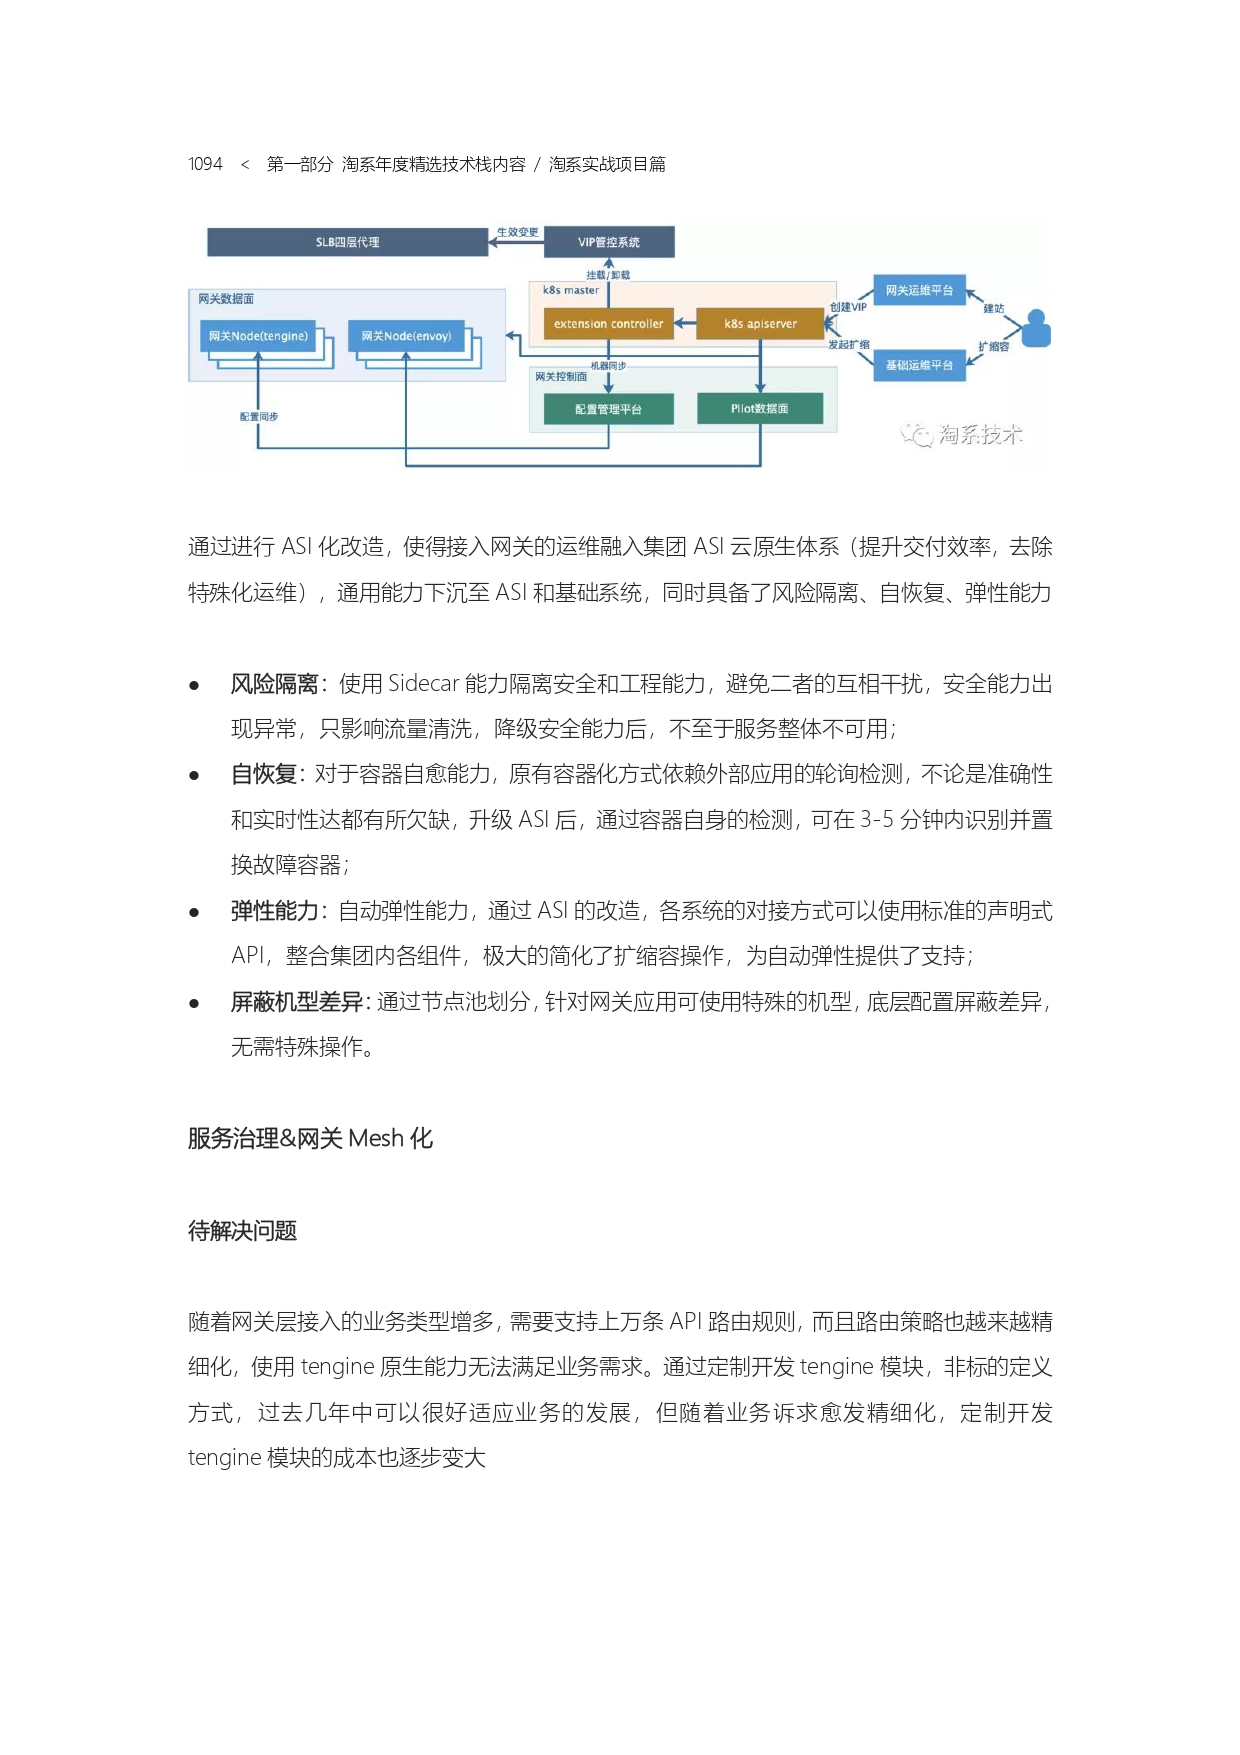 The Complete Works of Tao Technology 2020-571-1189-301-619_page-0224.jpg